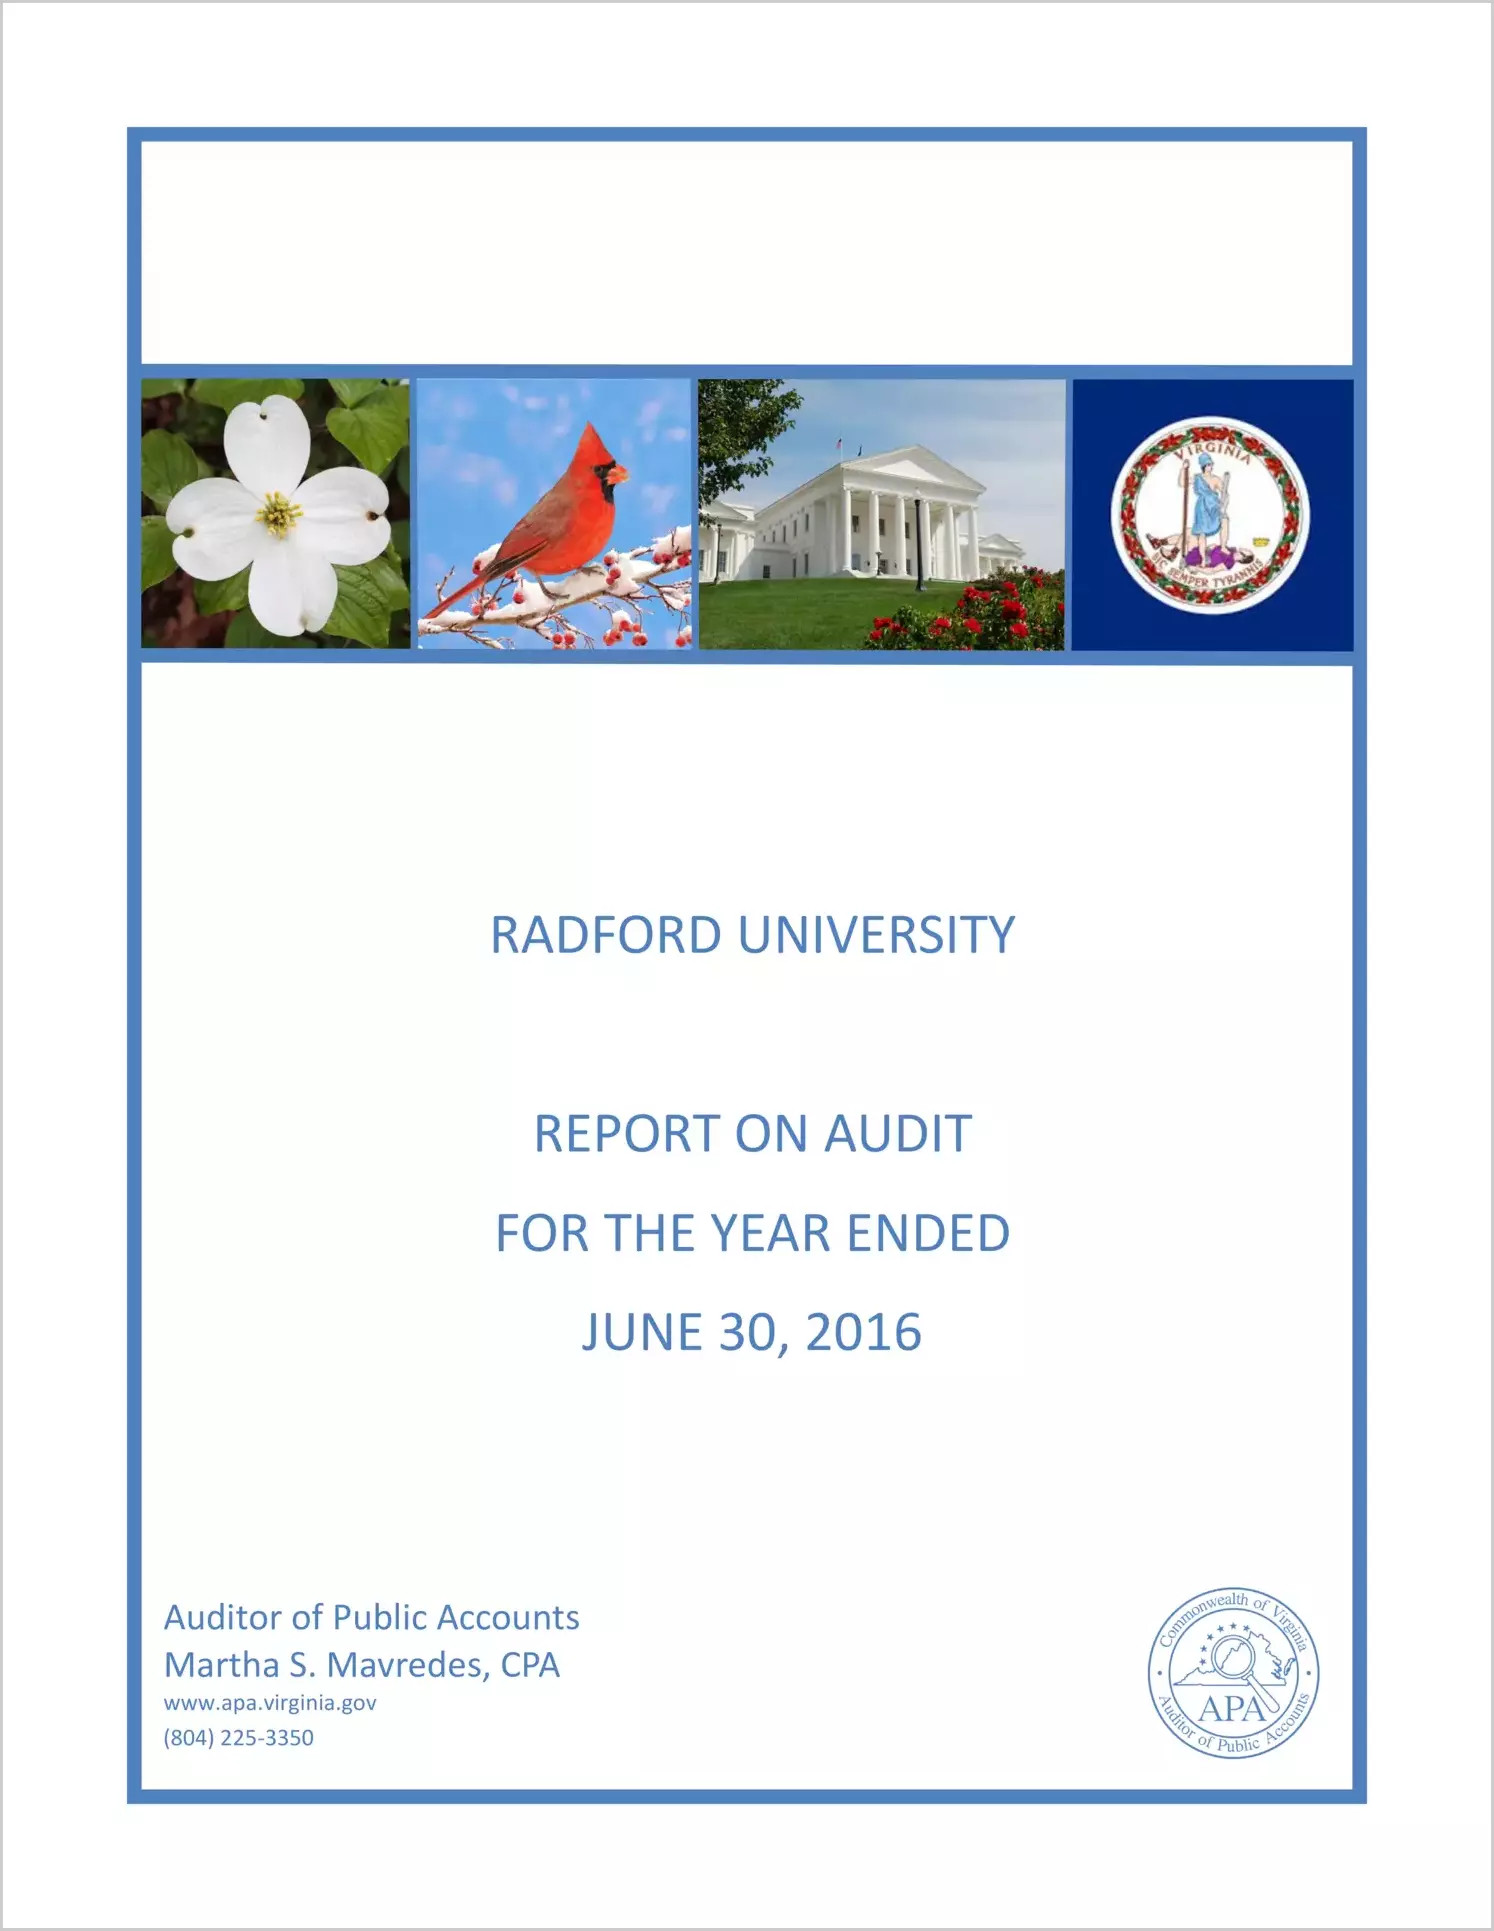 Radford University for the year ended June 30, 2016